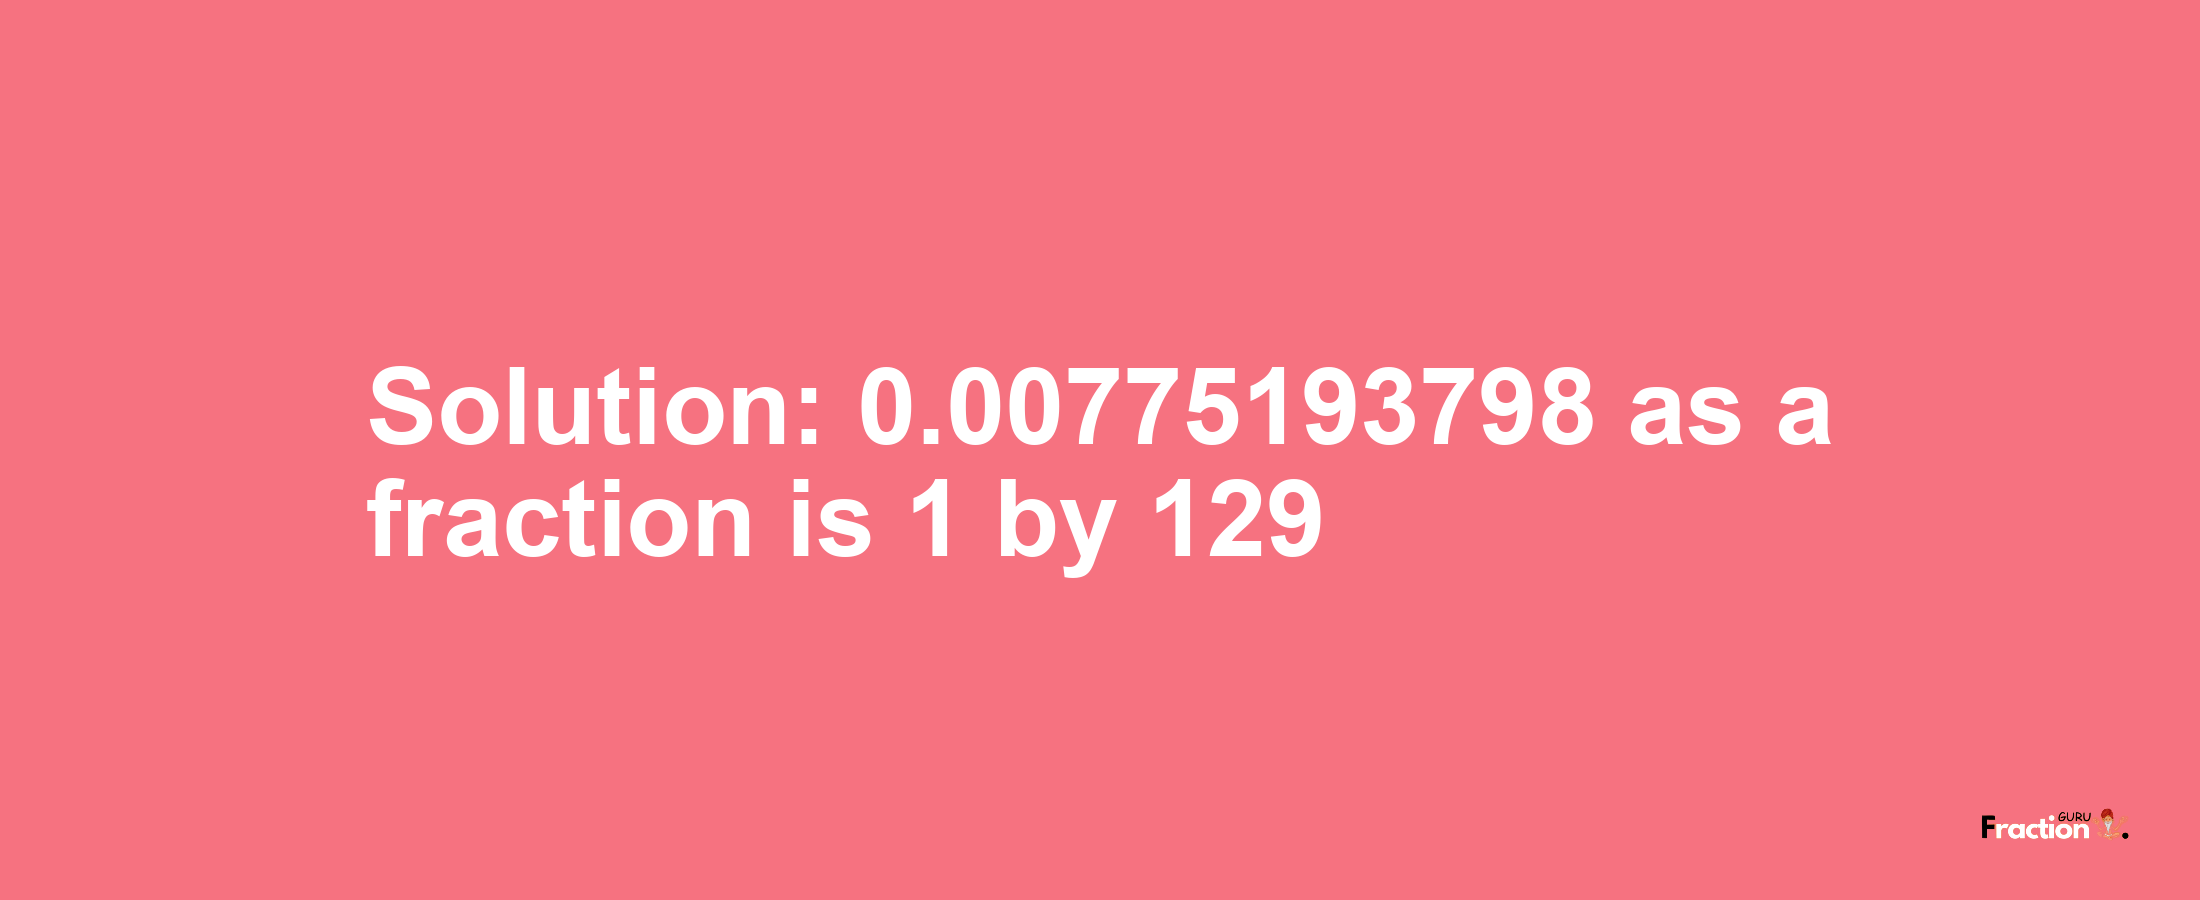 Solution:0.00775193798 as a fraction is 1/129